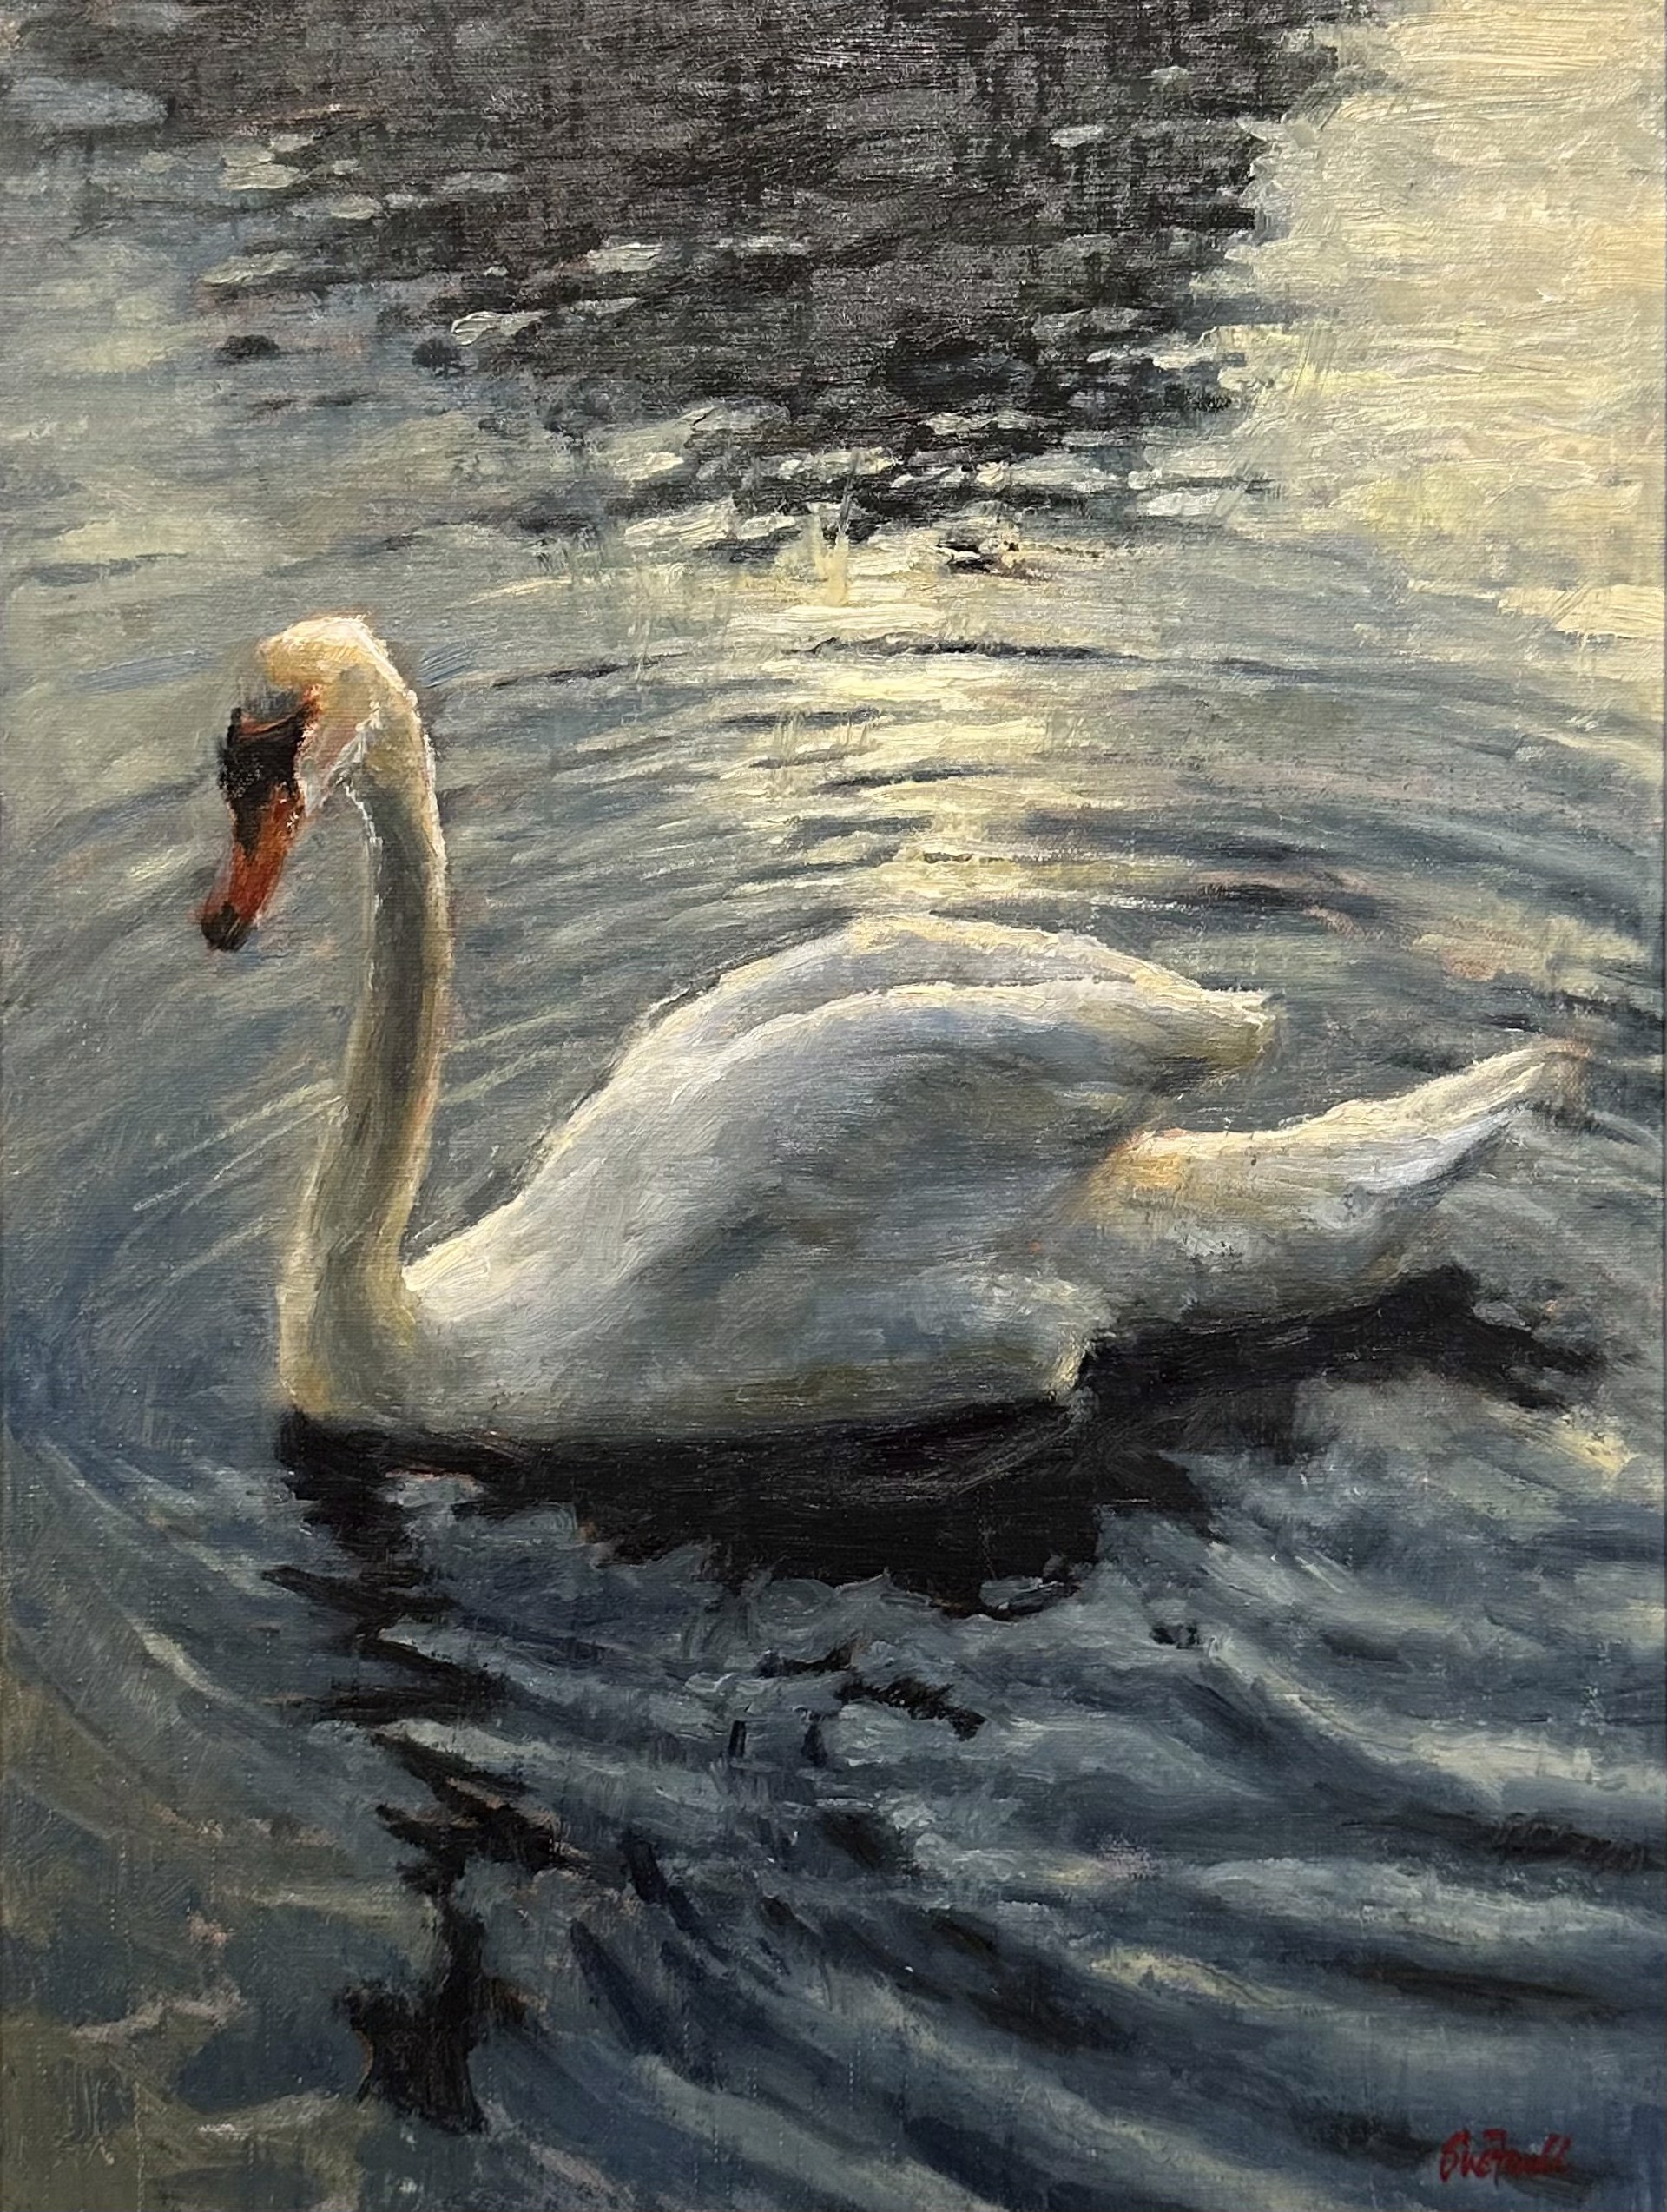 Swan Song by Sue Foell, opa